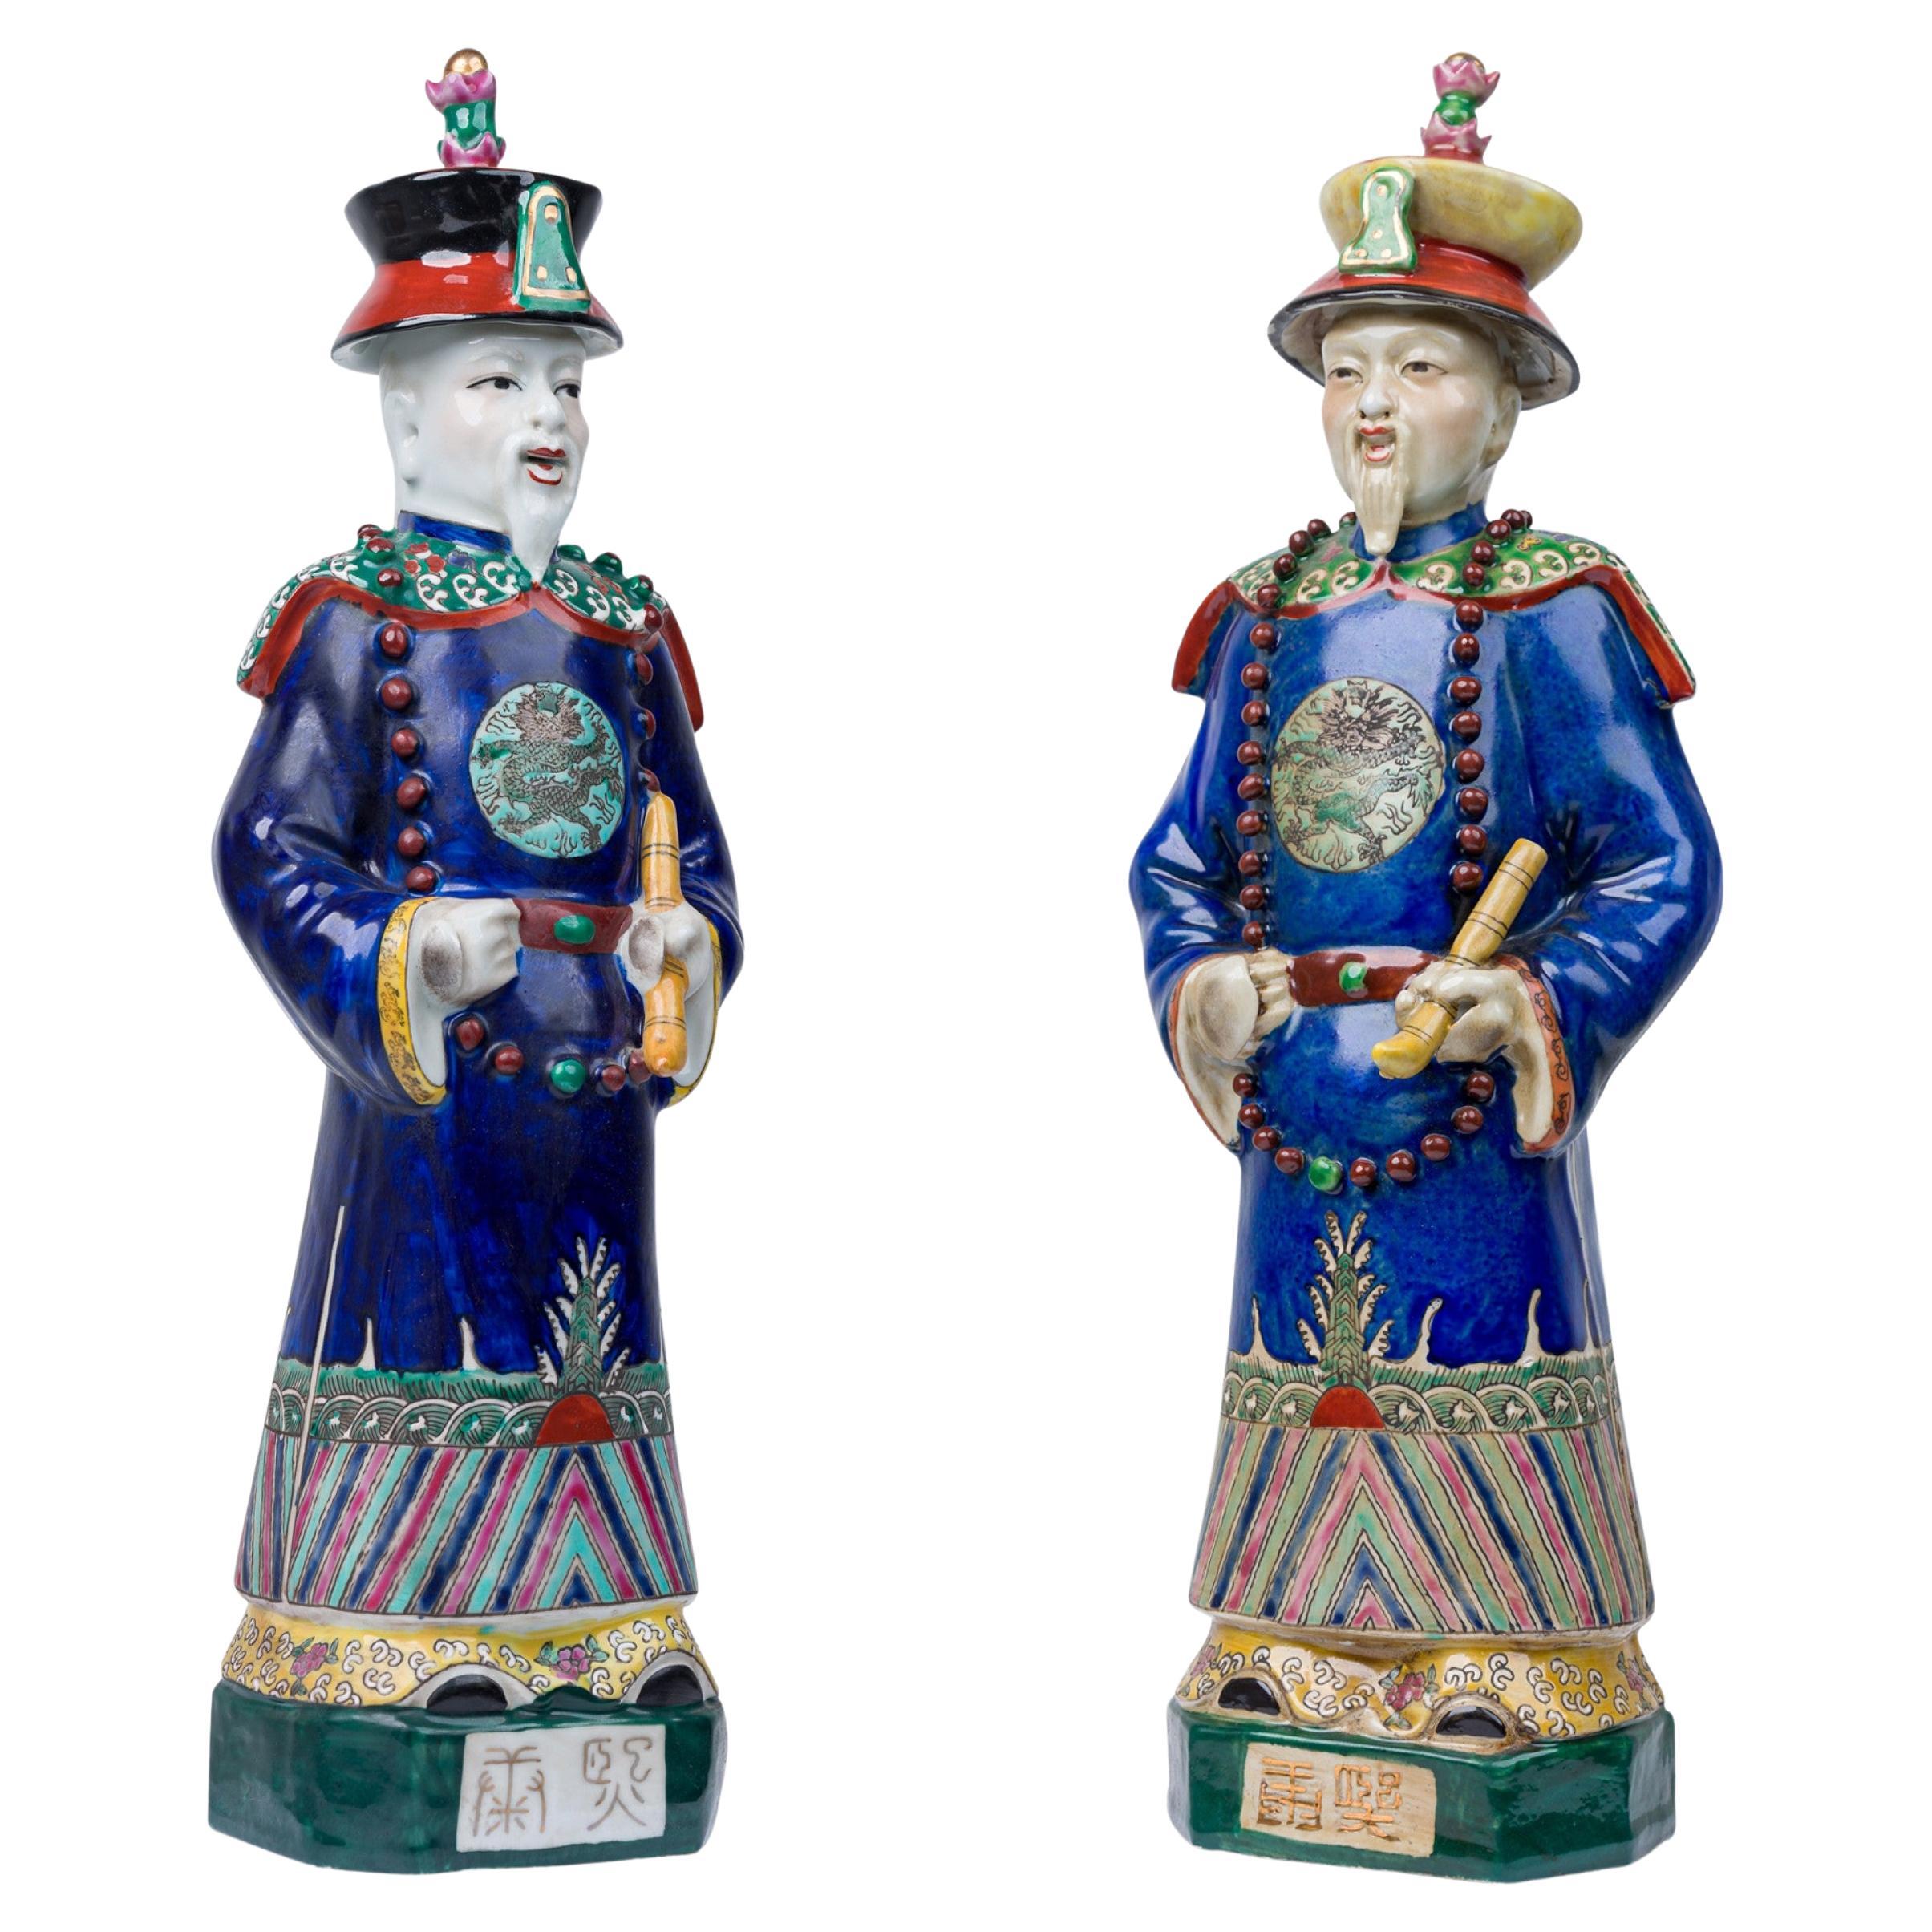 Pair of Chinese Painted Ceramic Figures Depicting a Blue Robed Emperor